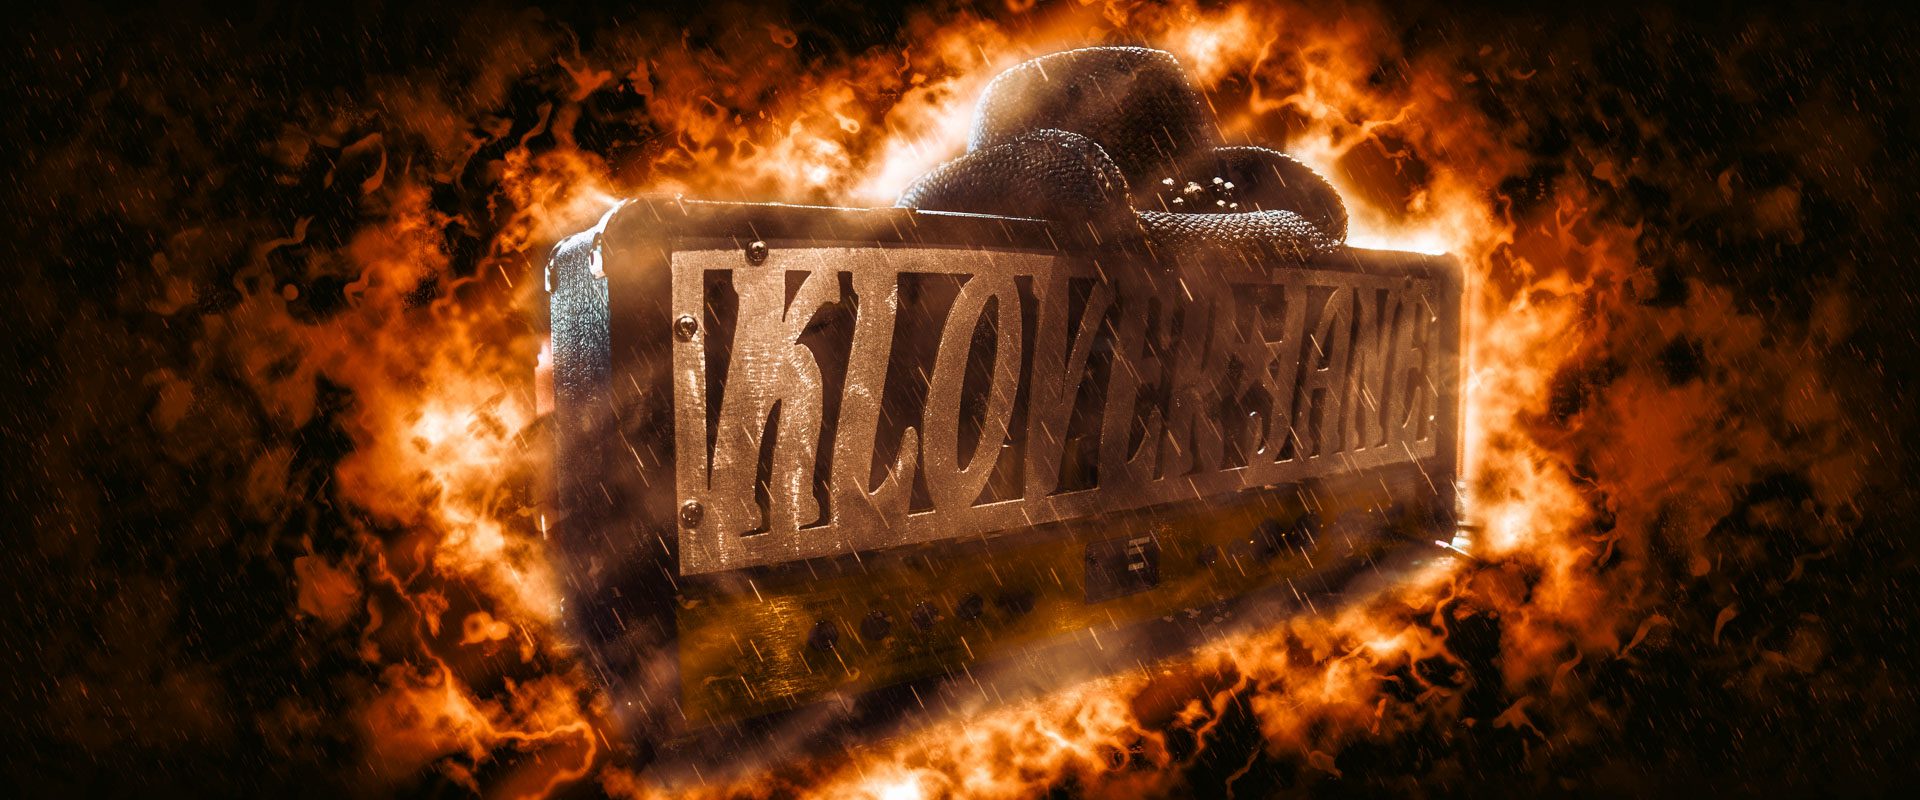 A fire background with the word klover on it.